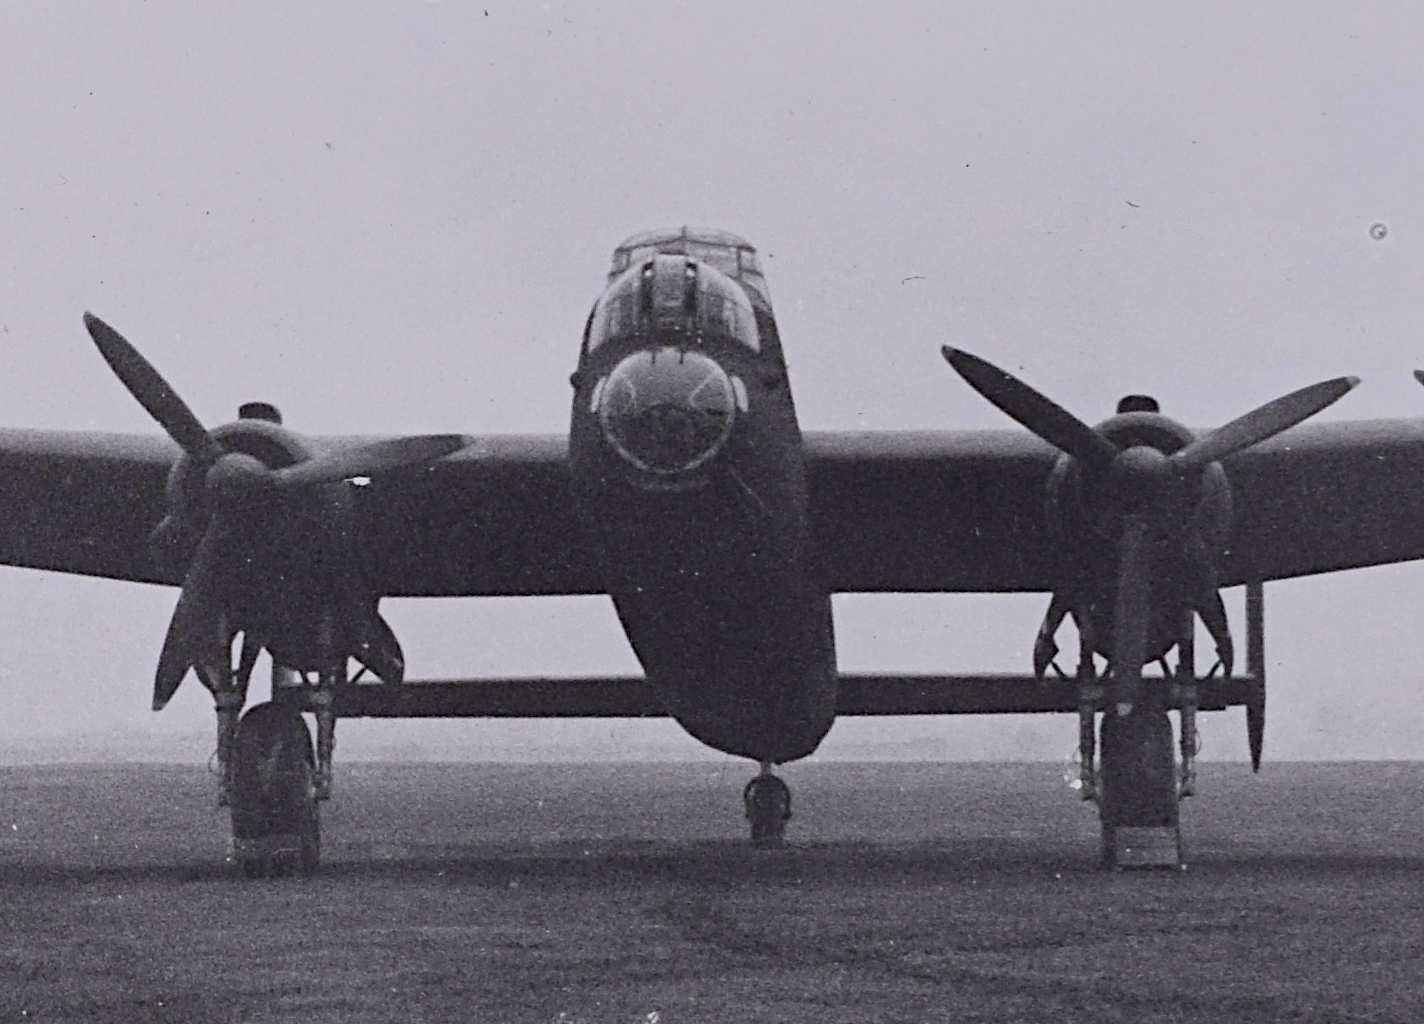 Avro Lancaster Bomber at dispersal point 1943 original silver gelatin photograph - Photograph by Unknown